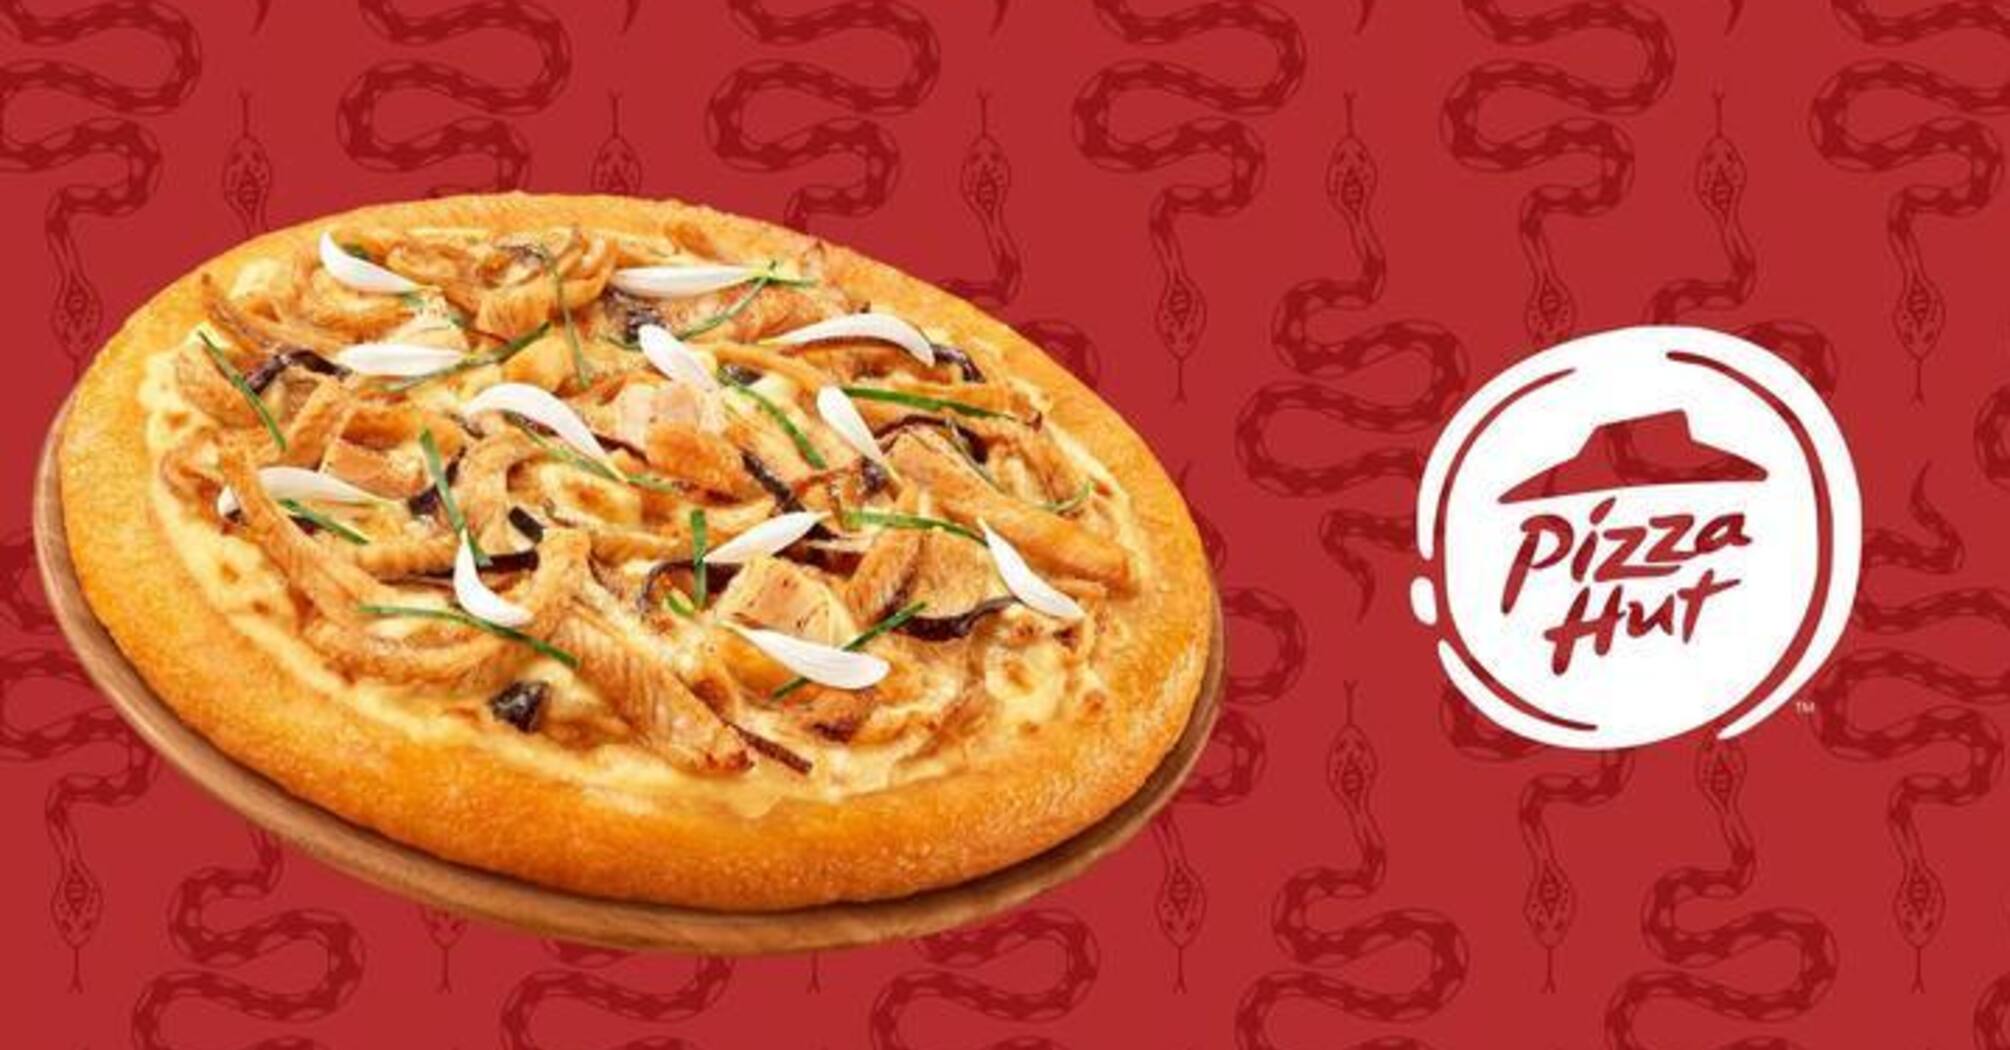 Snake pizza in Hong Kong: a combination of traditional and modern food